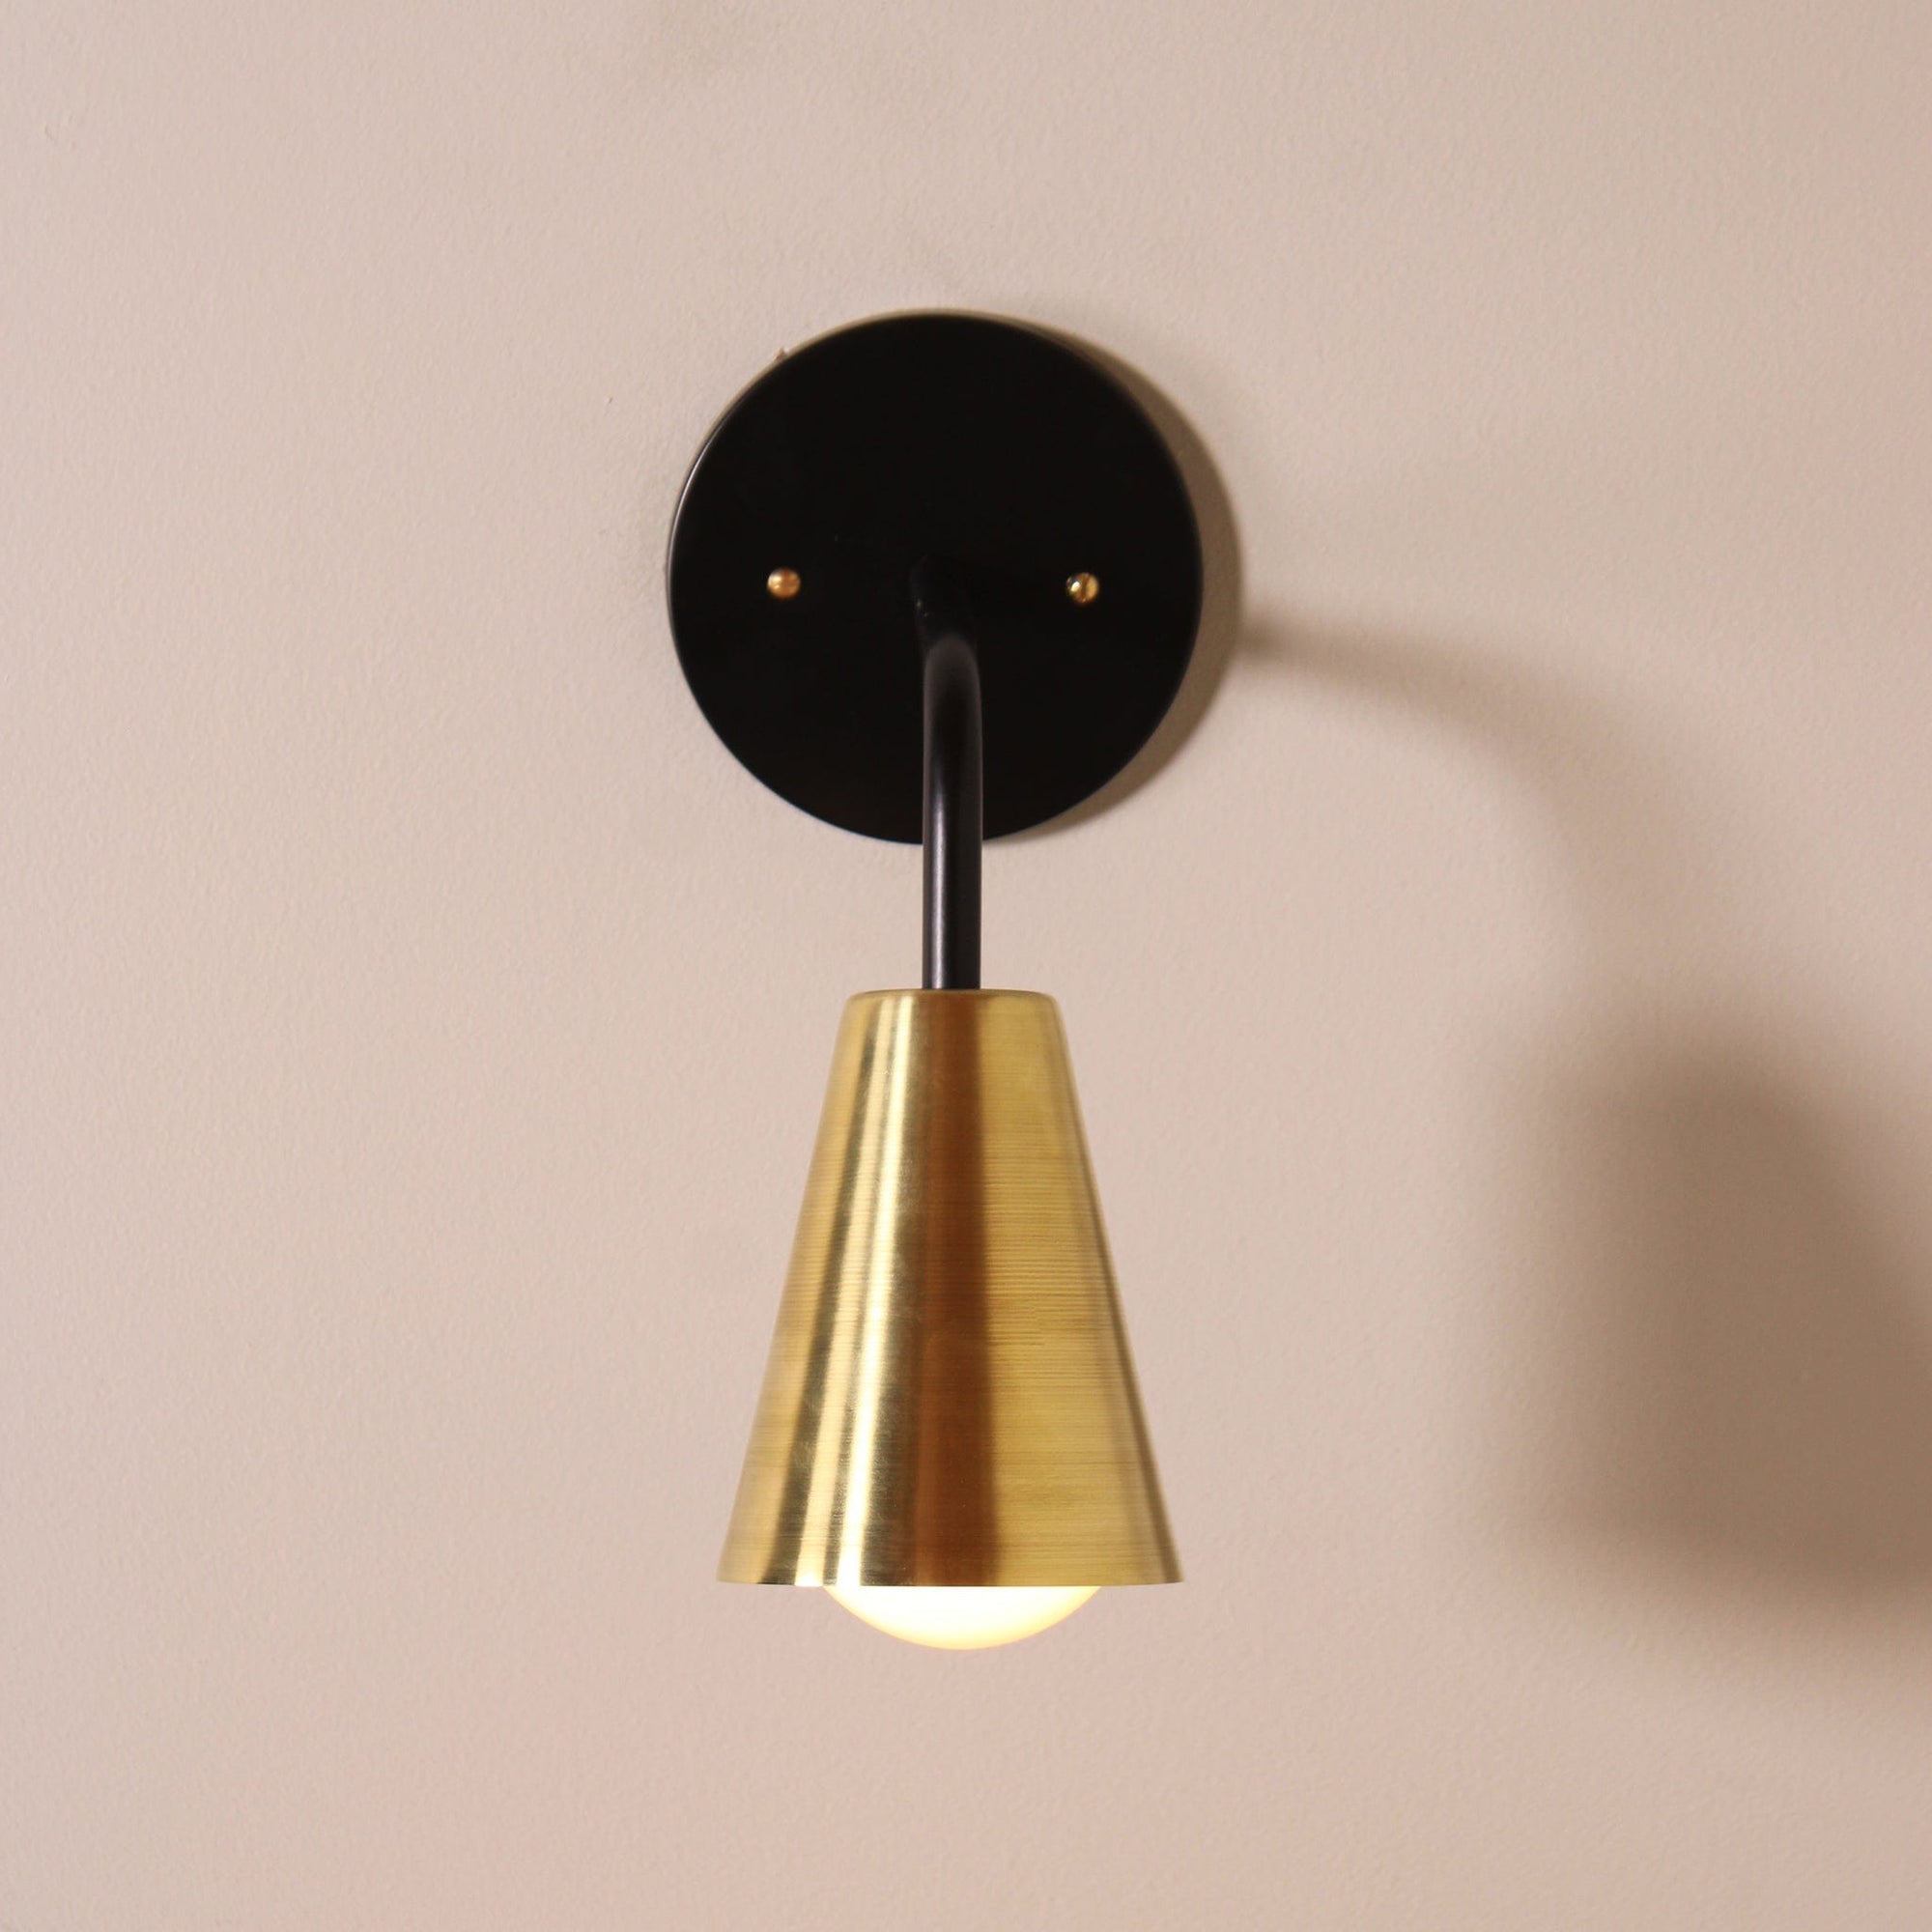 Monte Carlo wall sconce Black / Brass shade onefortythree